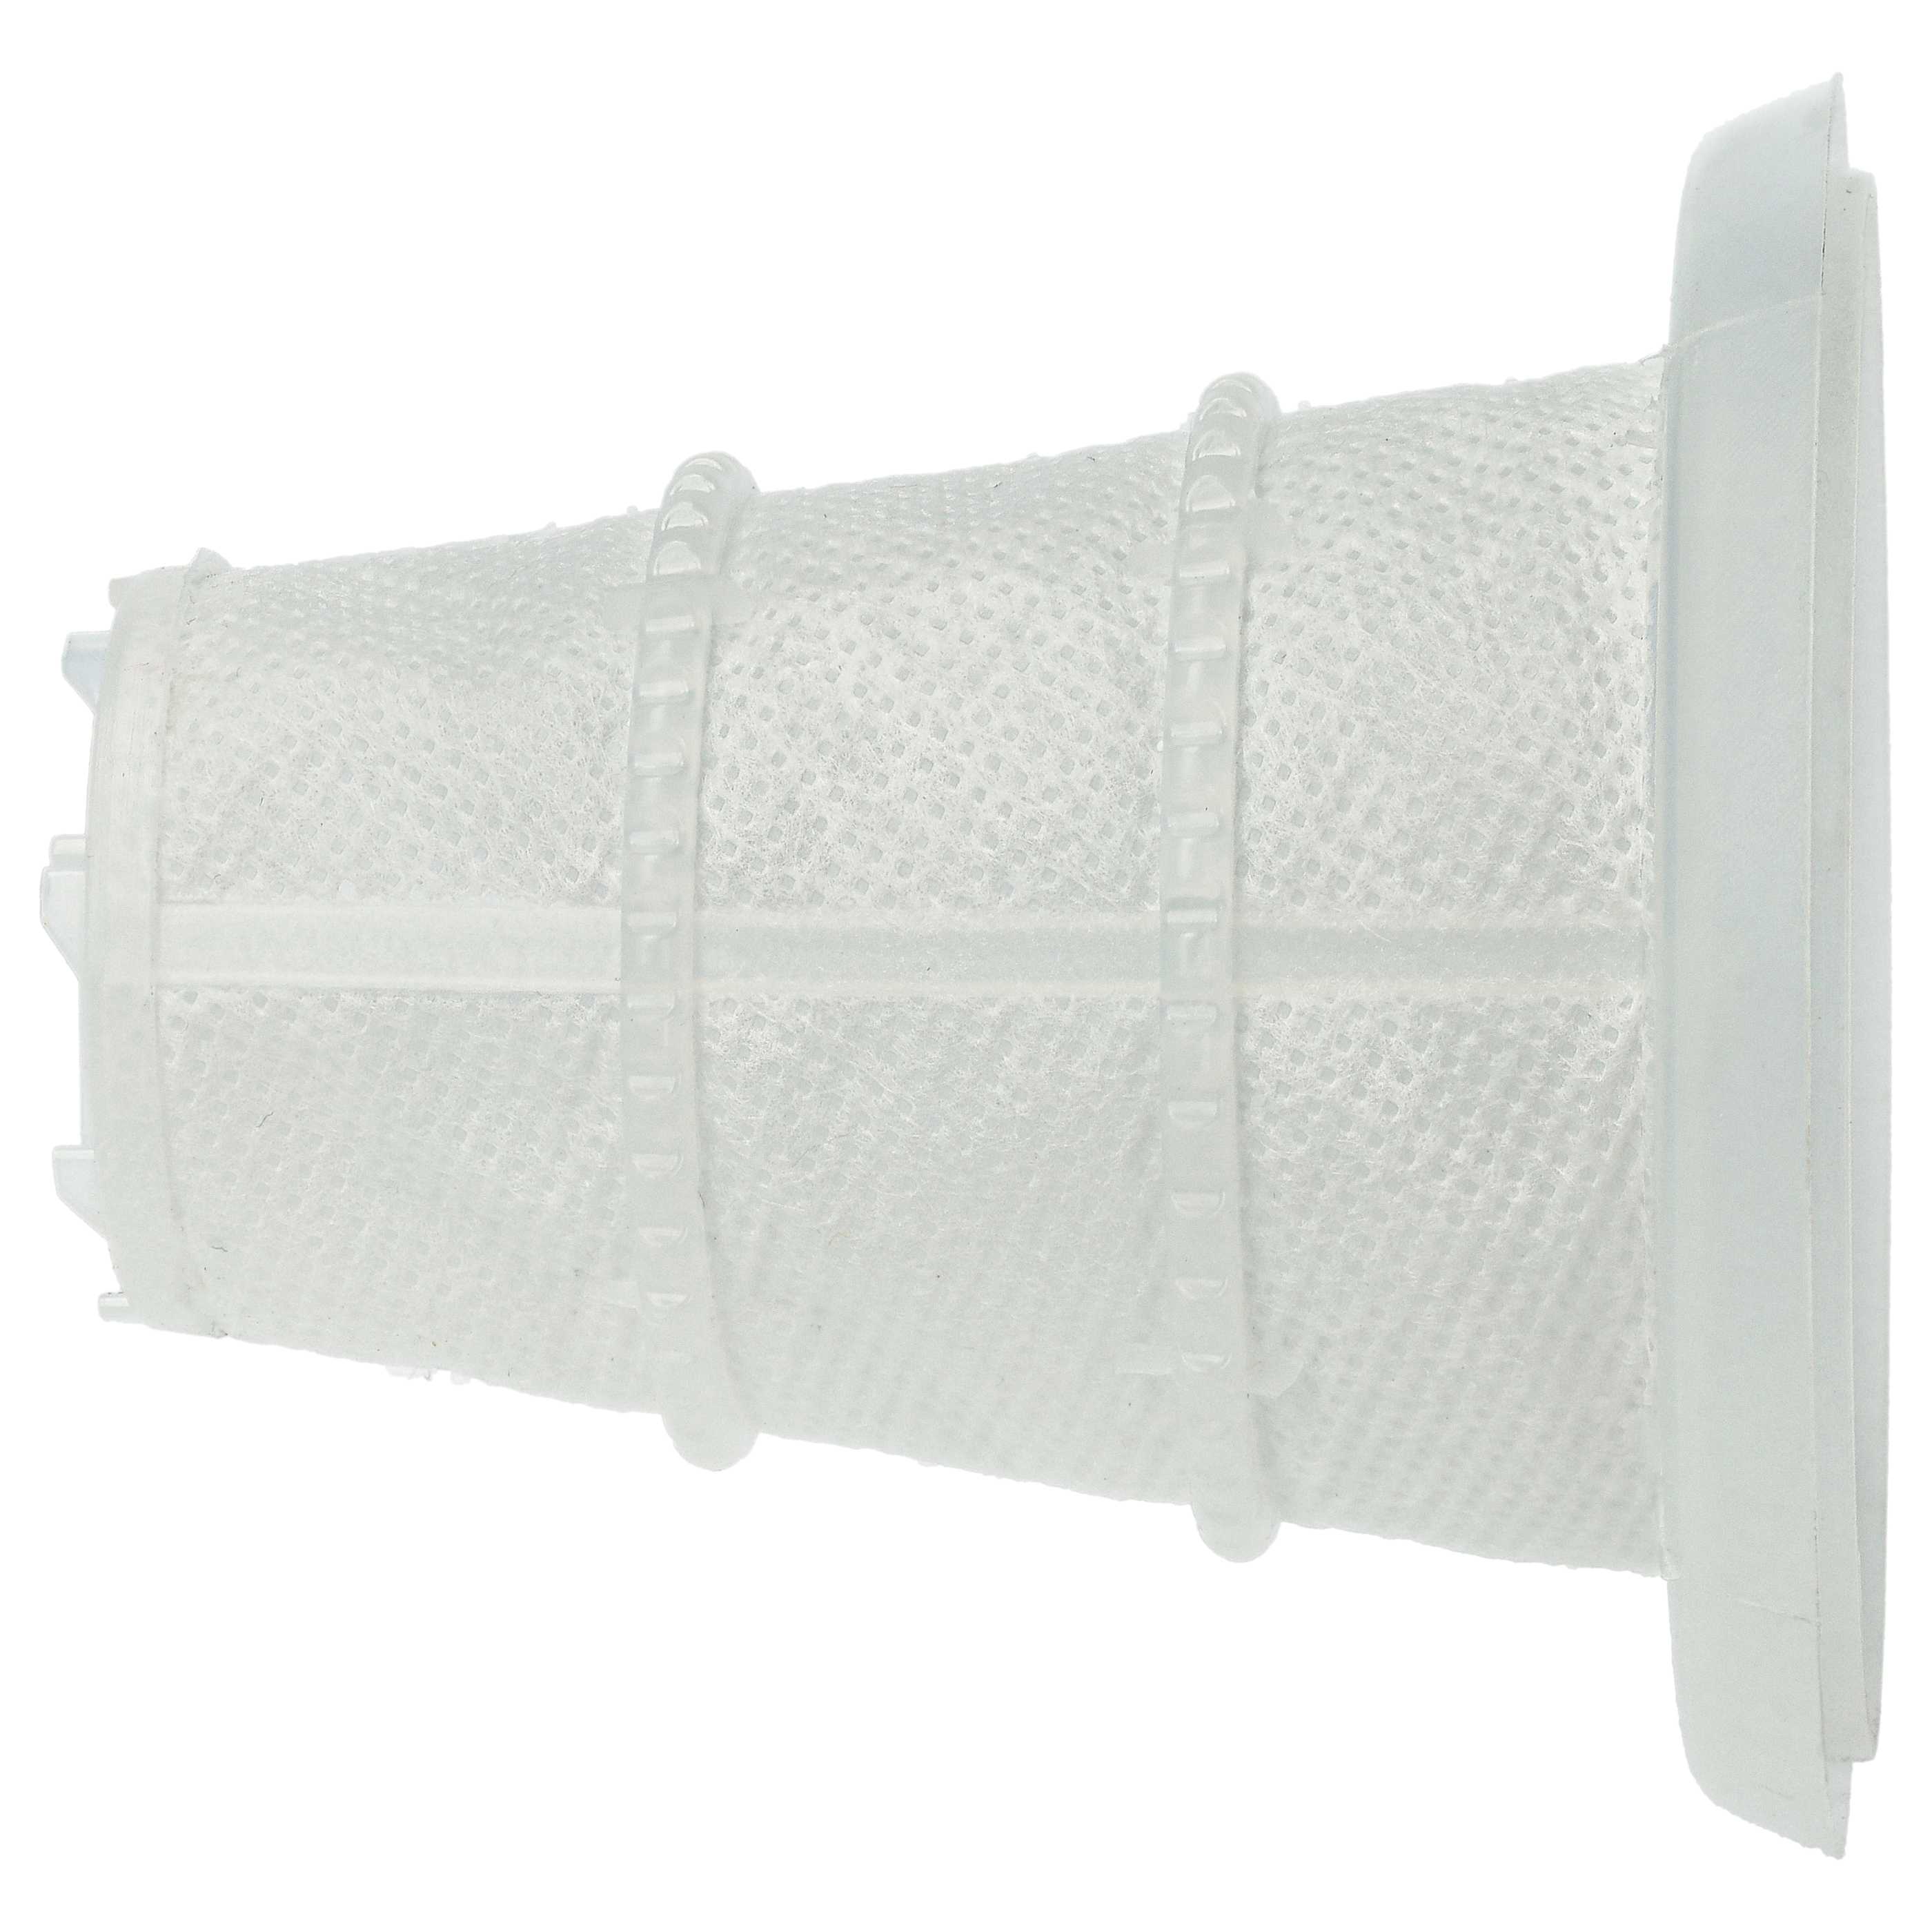 1x replacement filter replaces Black & Decker VF70 for Black & Decker Vacuum Cleaner